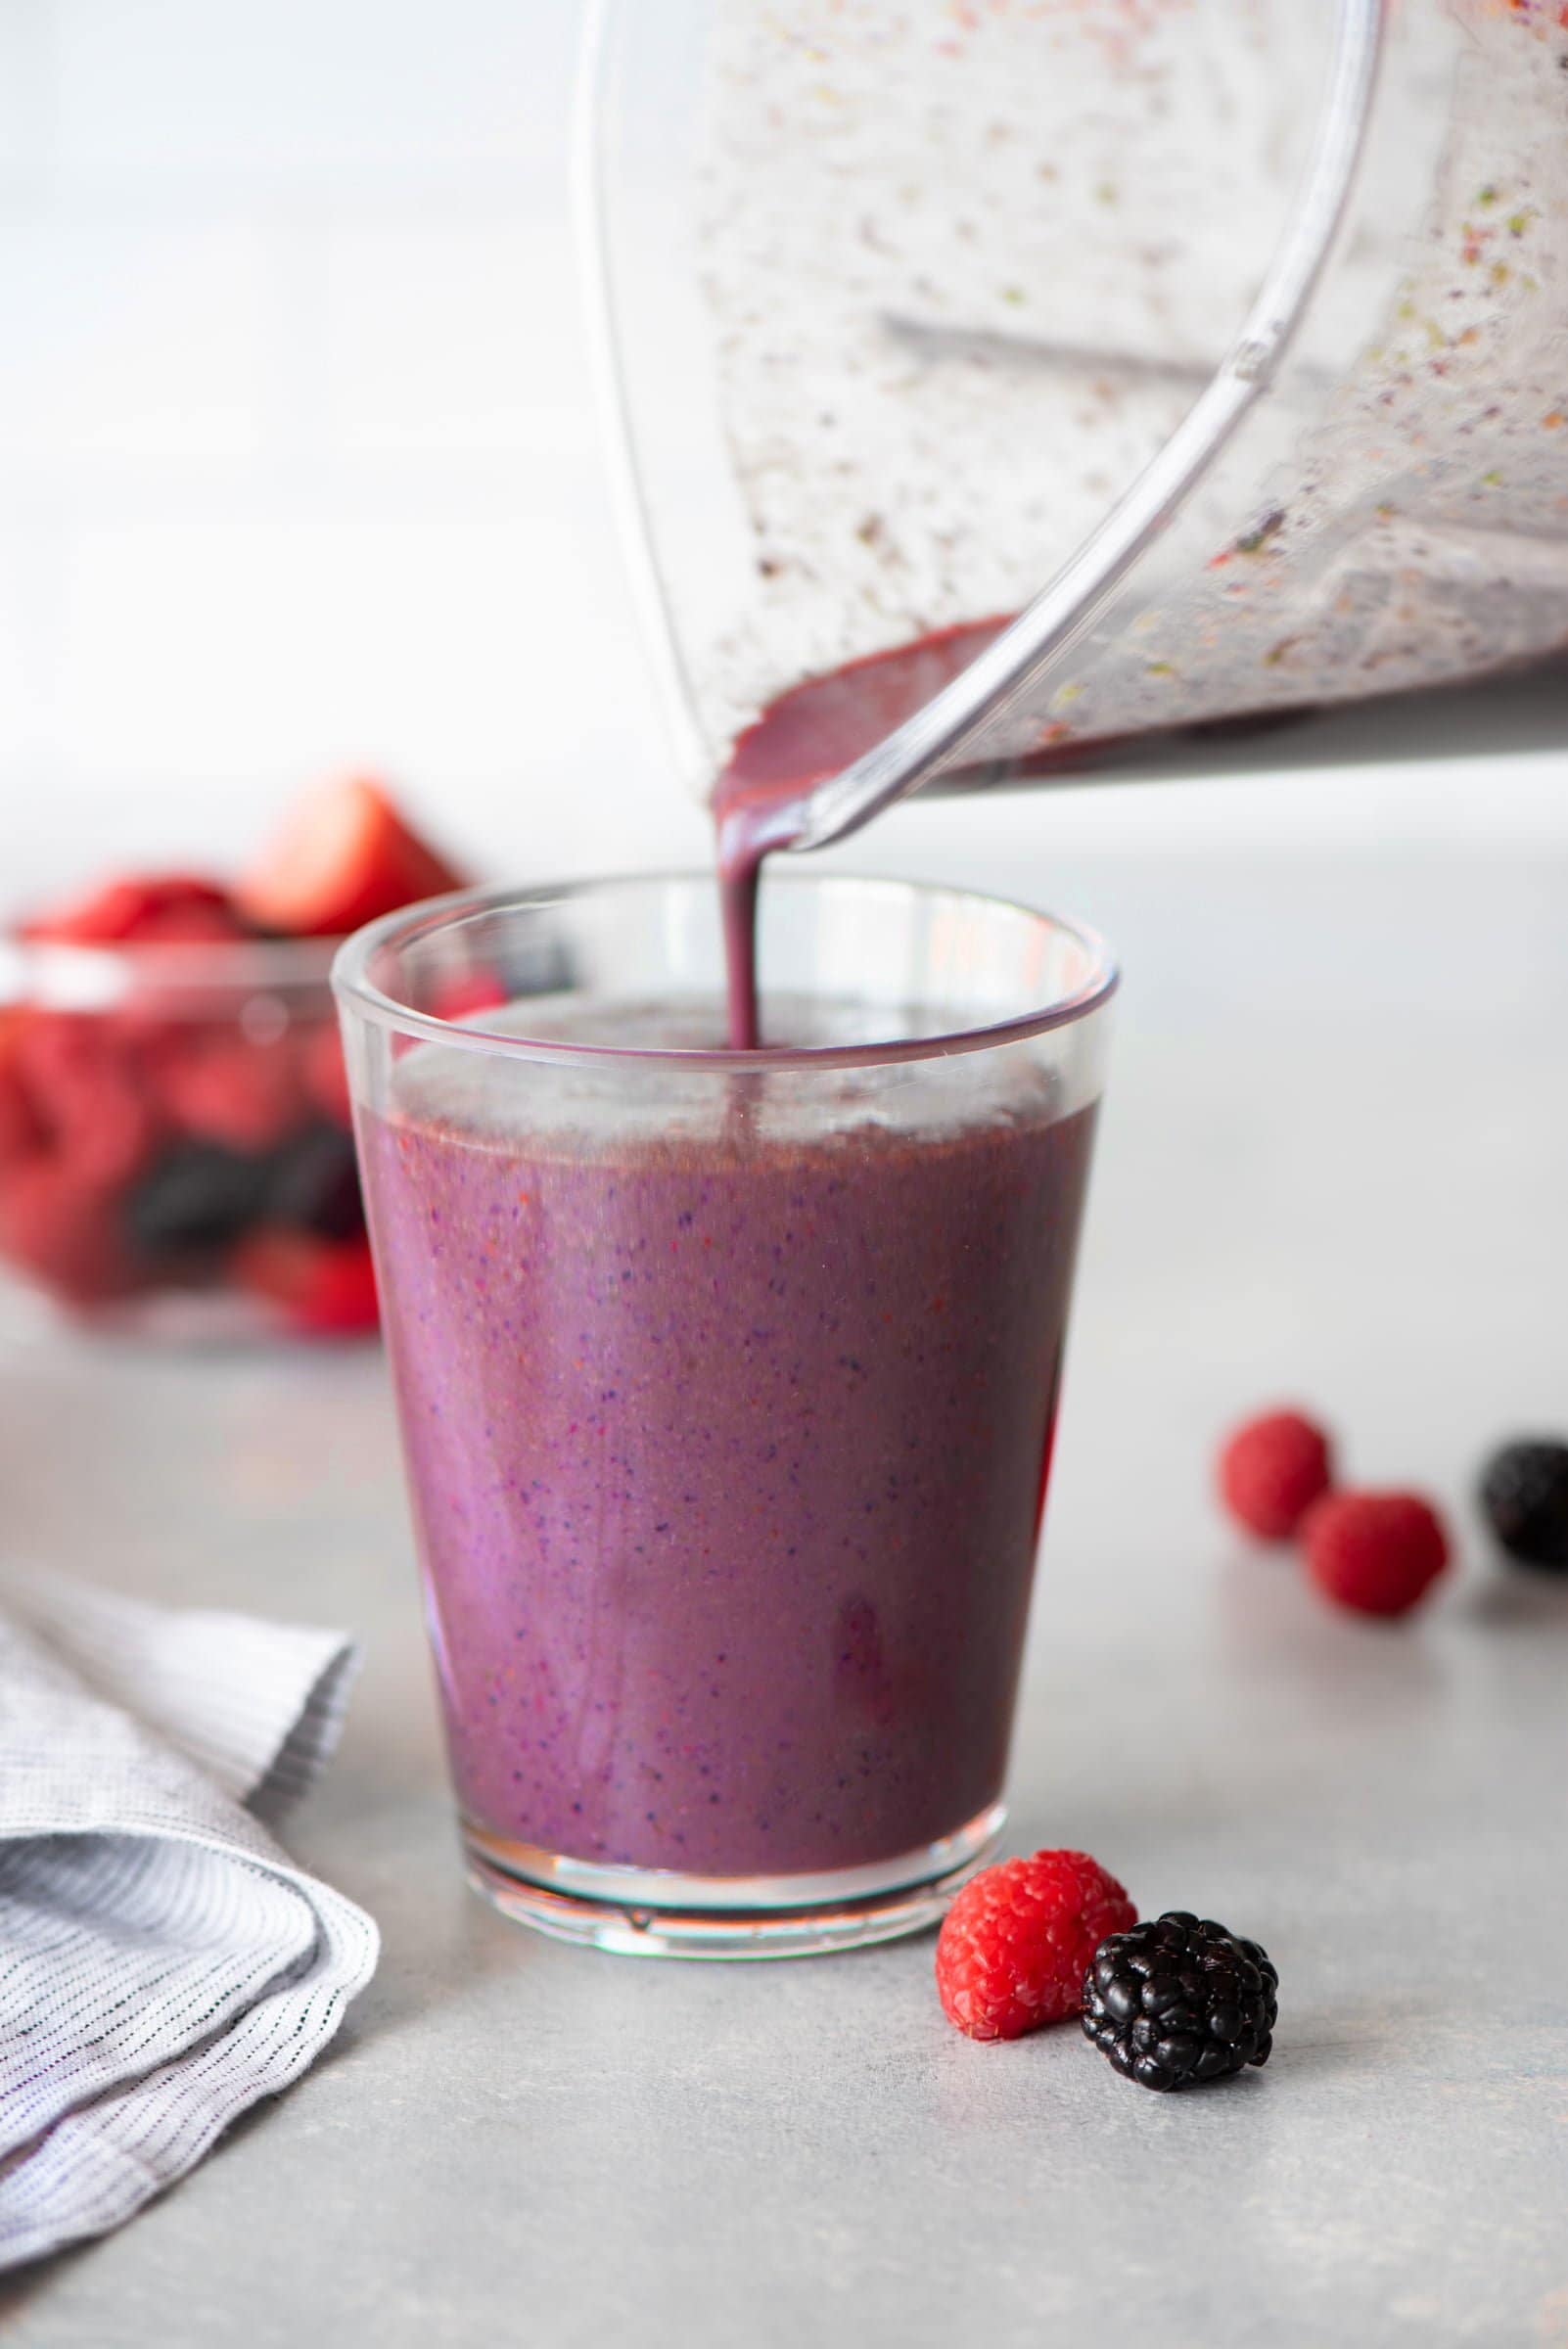 Purple smoothie being poured from a blender carafe to a clear glass, surrounded by whole berries.